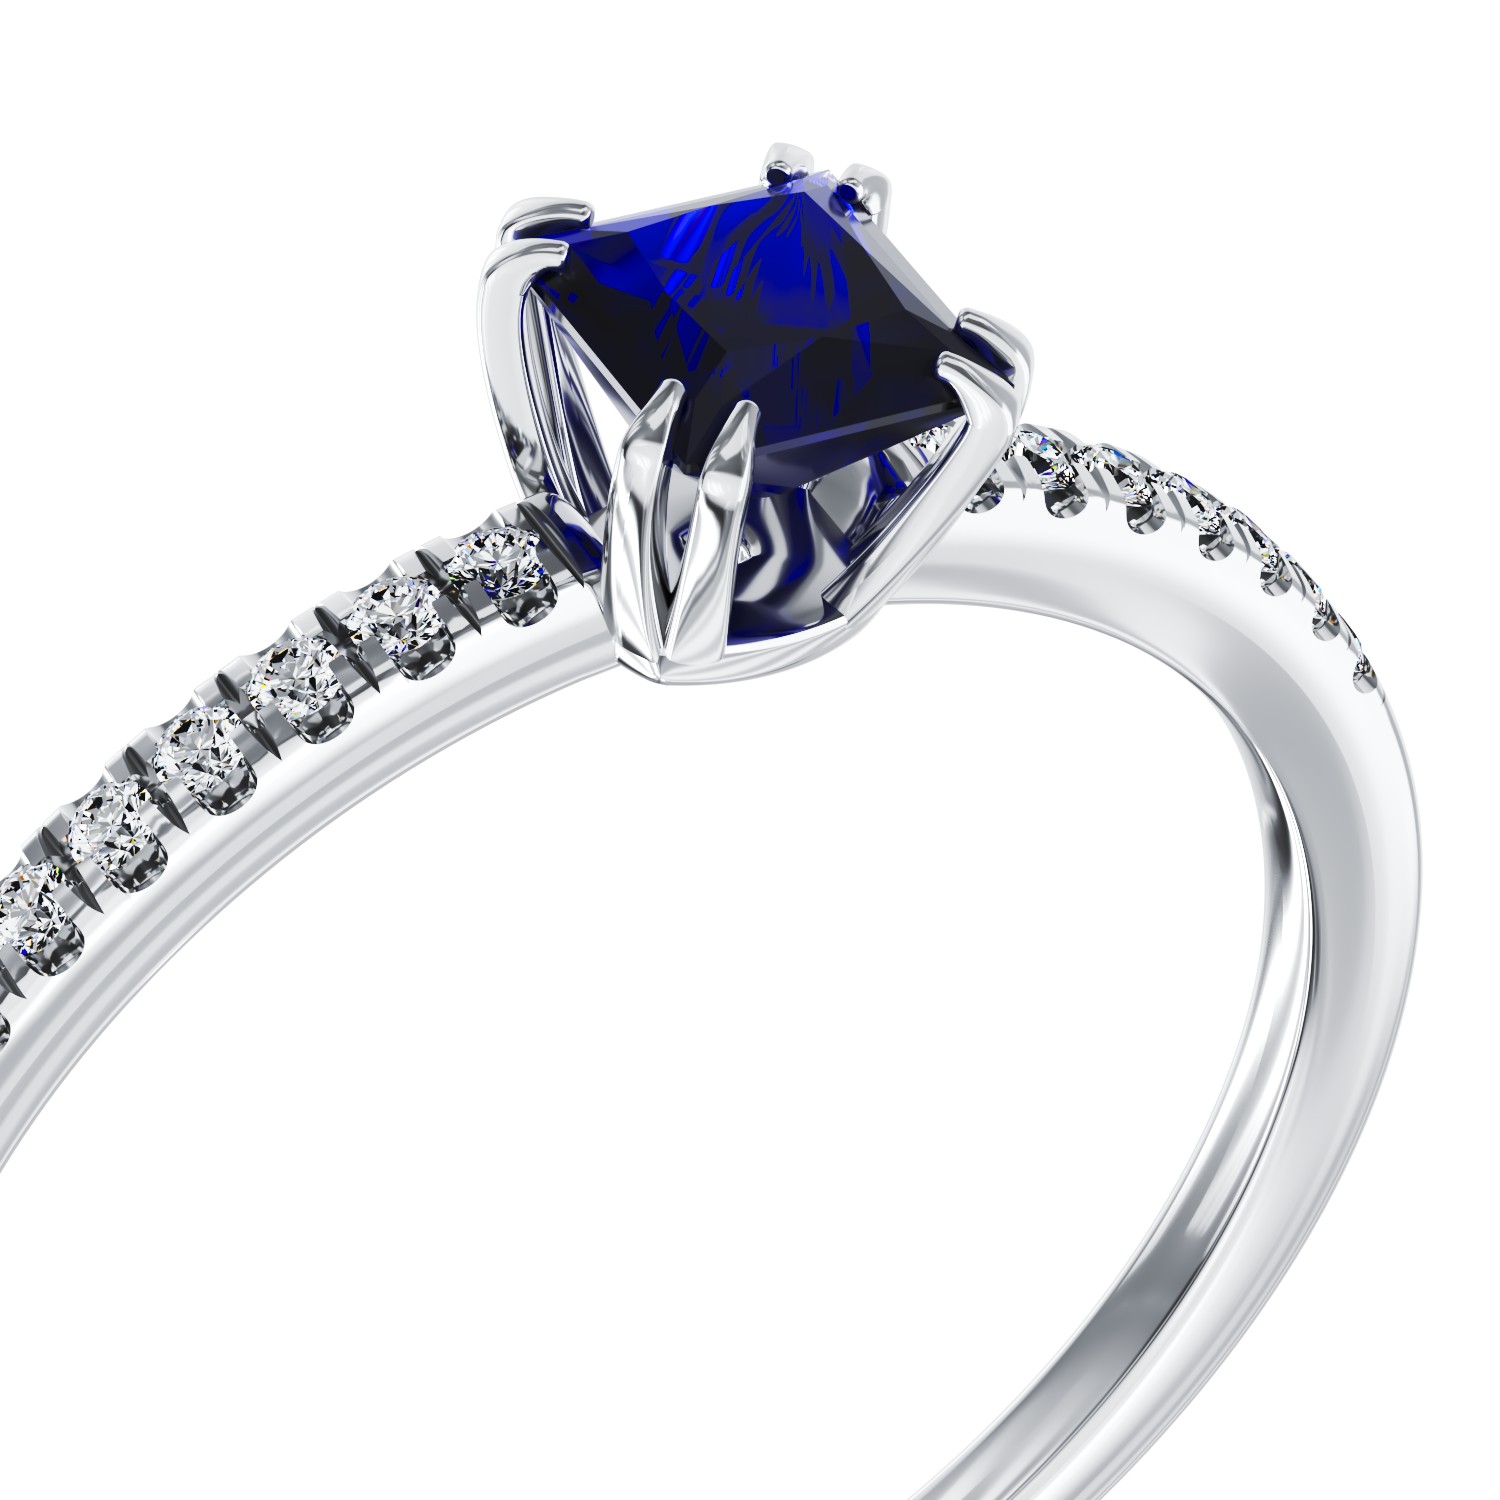 18K white gold engagement ring with 0.32ct iolite and 0.06ct diamonds